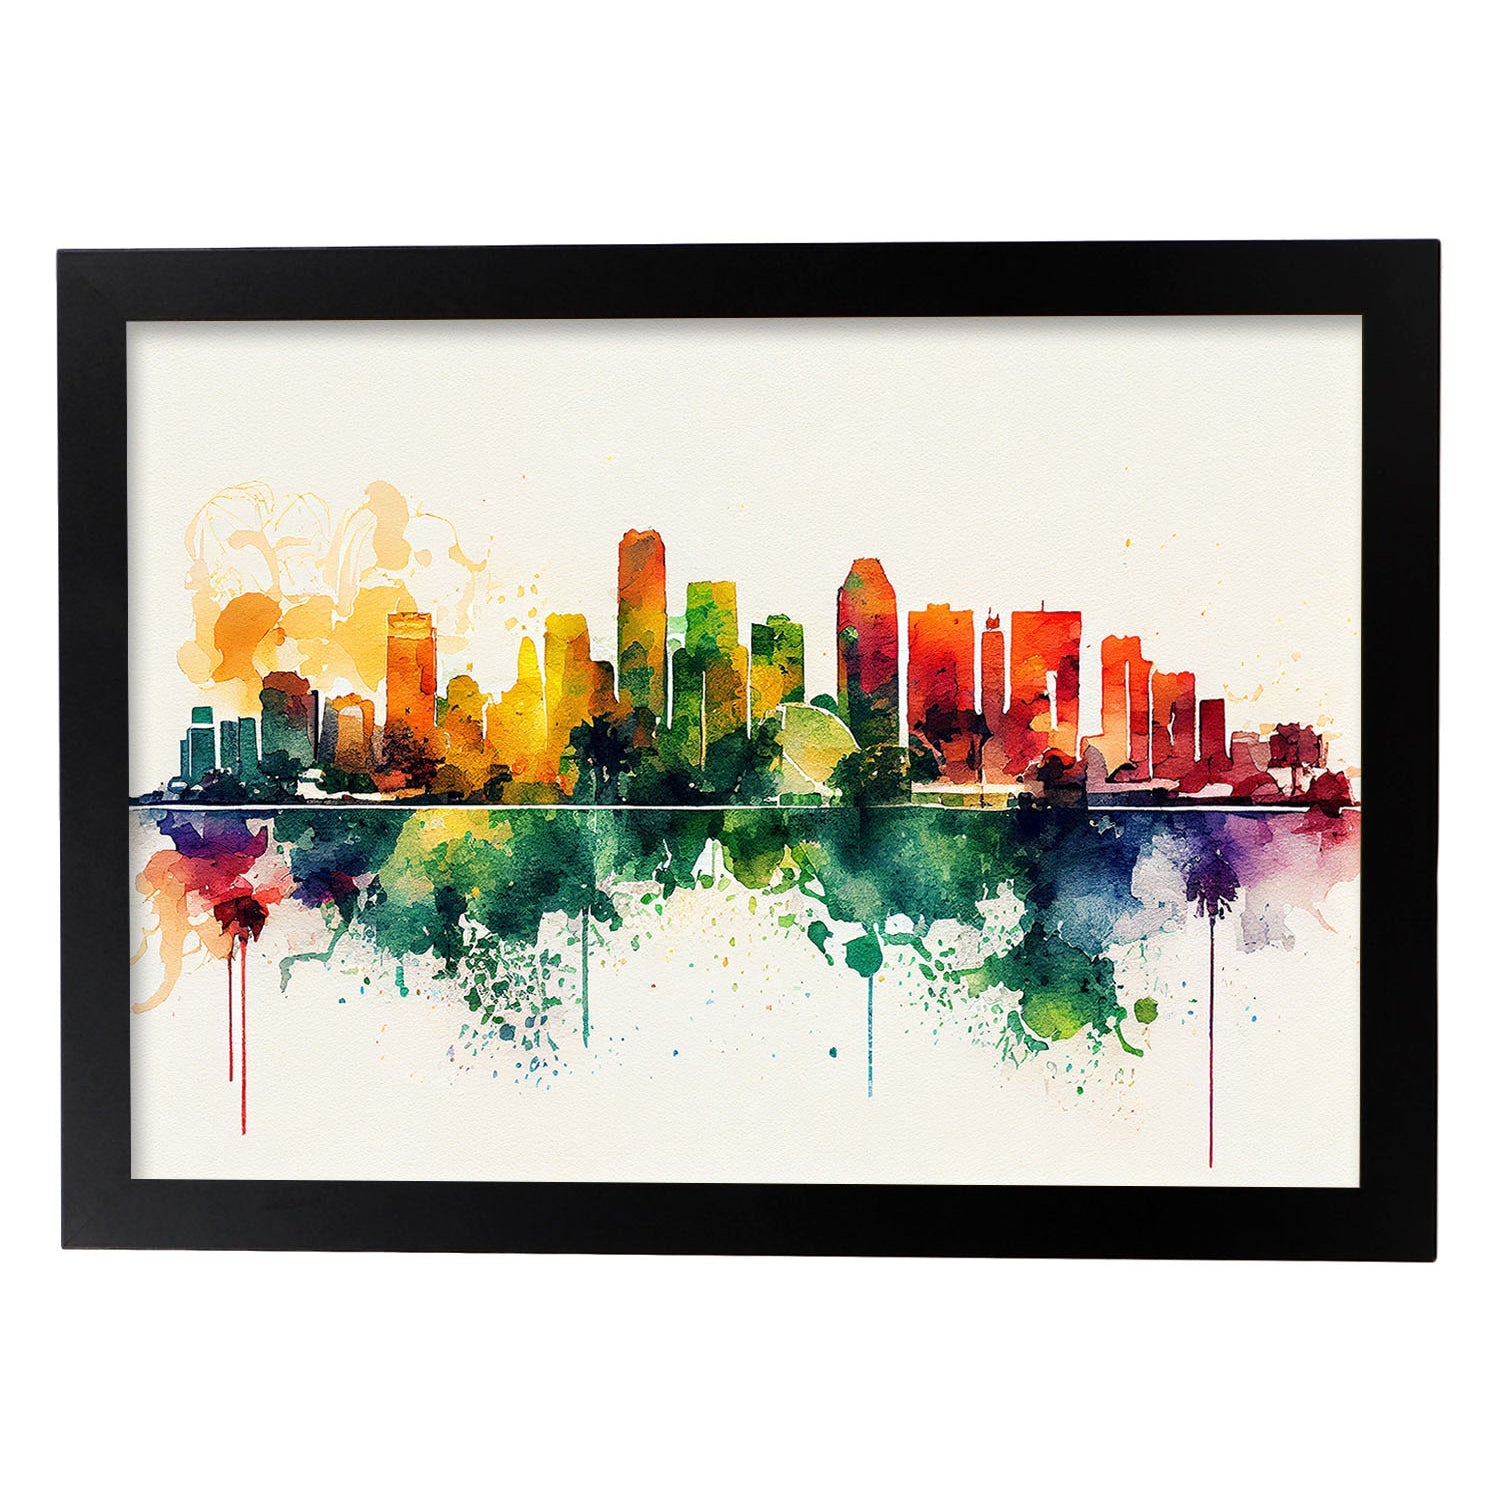 Nacnic watercolor of a skyline of the city of Miami_1. Aesthetic Wall Art Prints for Bedroom or Living Room Design.-Artwork-Nacnic-Nacnic Estudio SL